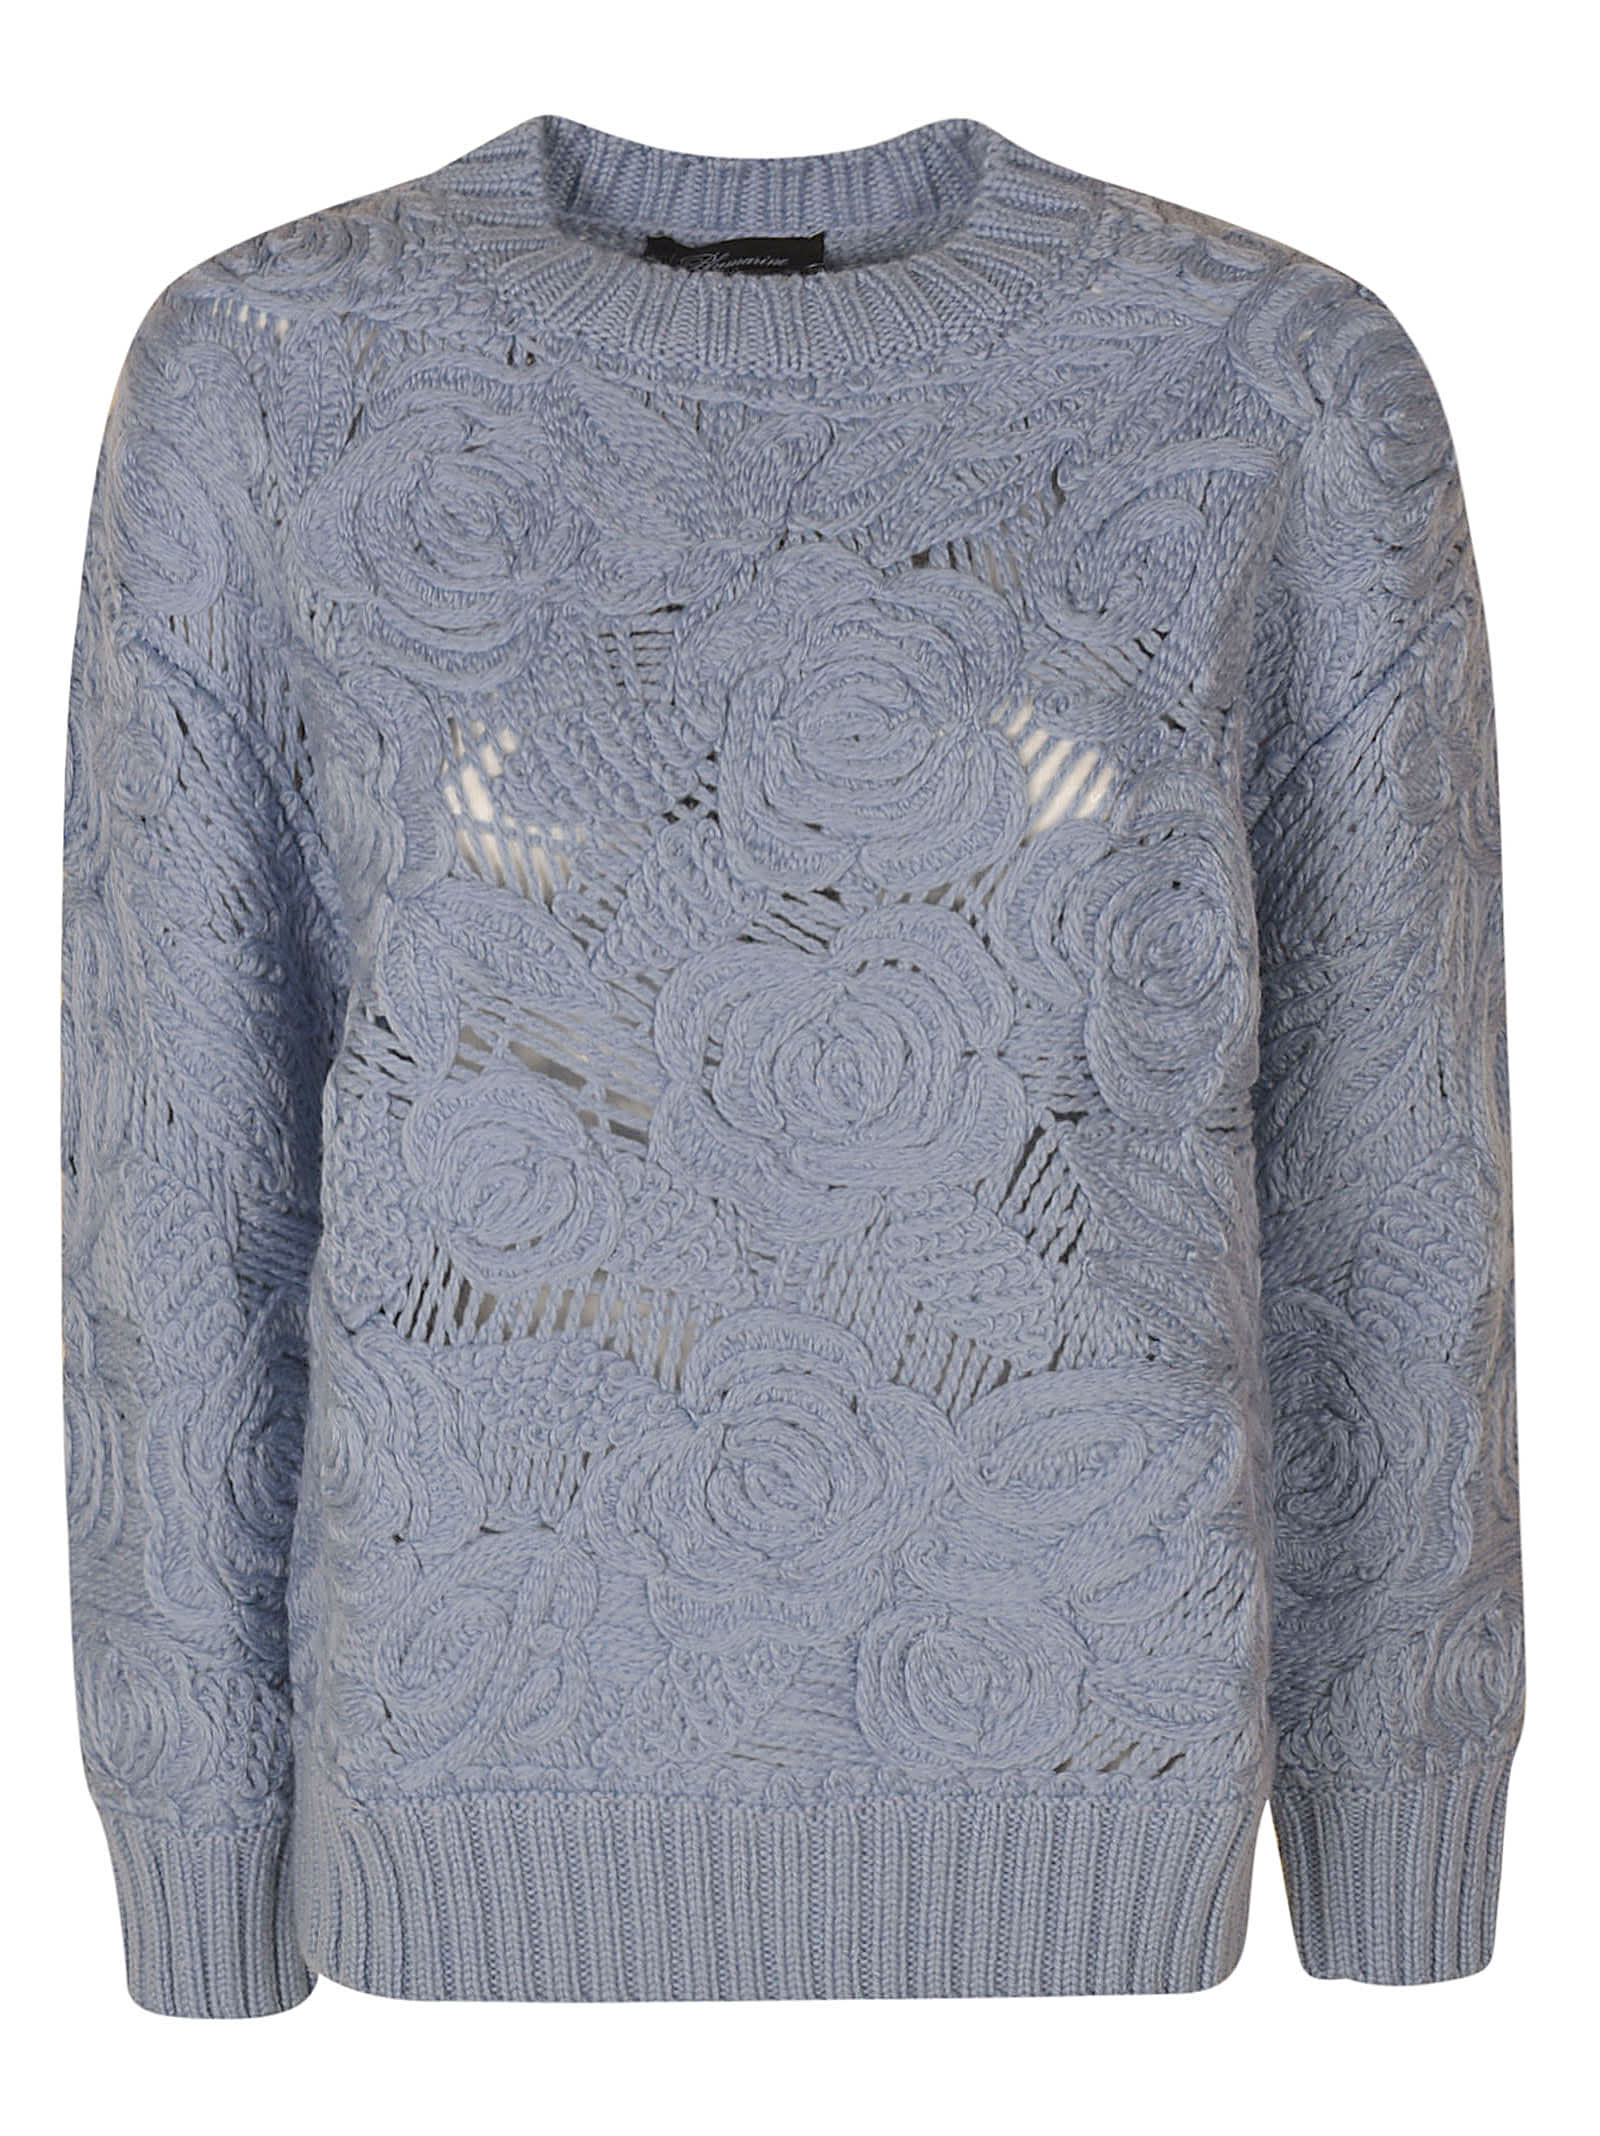 Blumarine Floral Embroidery Sweater